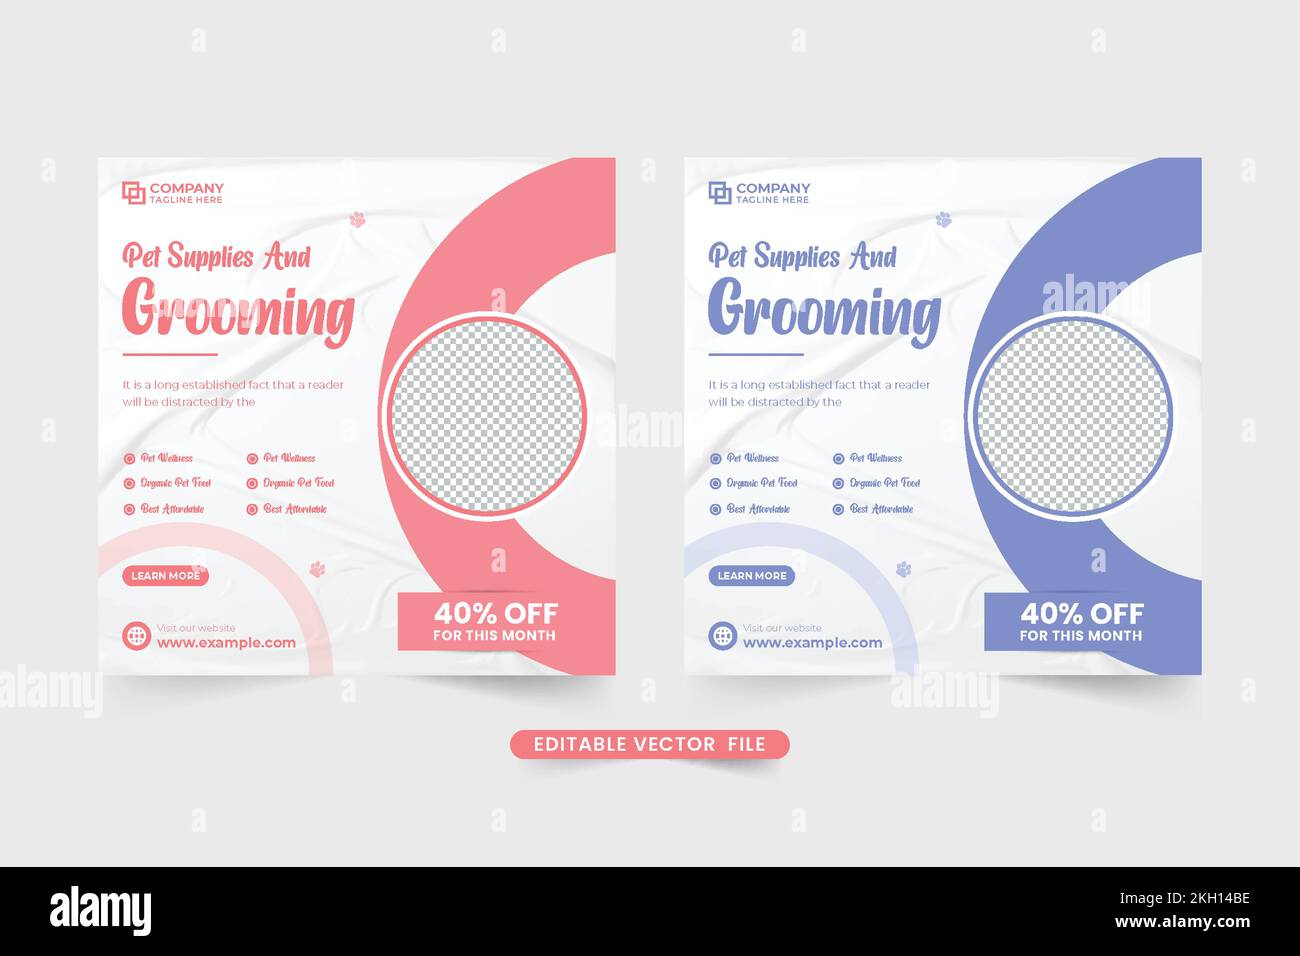 Pet supplies and grooming shop template for social media marketing. Pet care shop advertising web banners with blue and pink colors. Animal veterinary Stock Vector